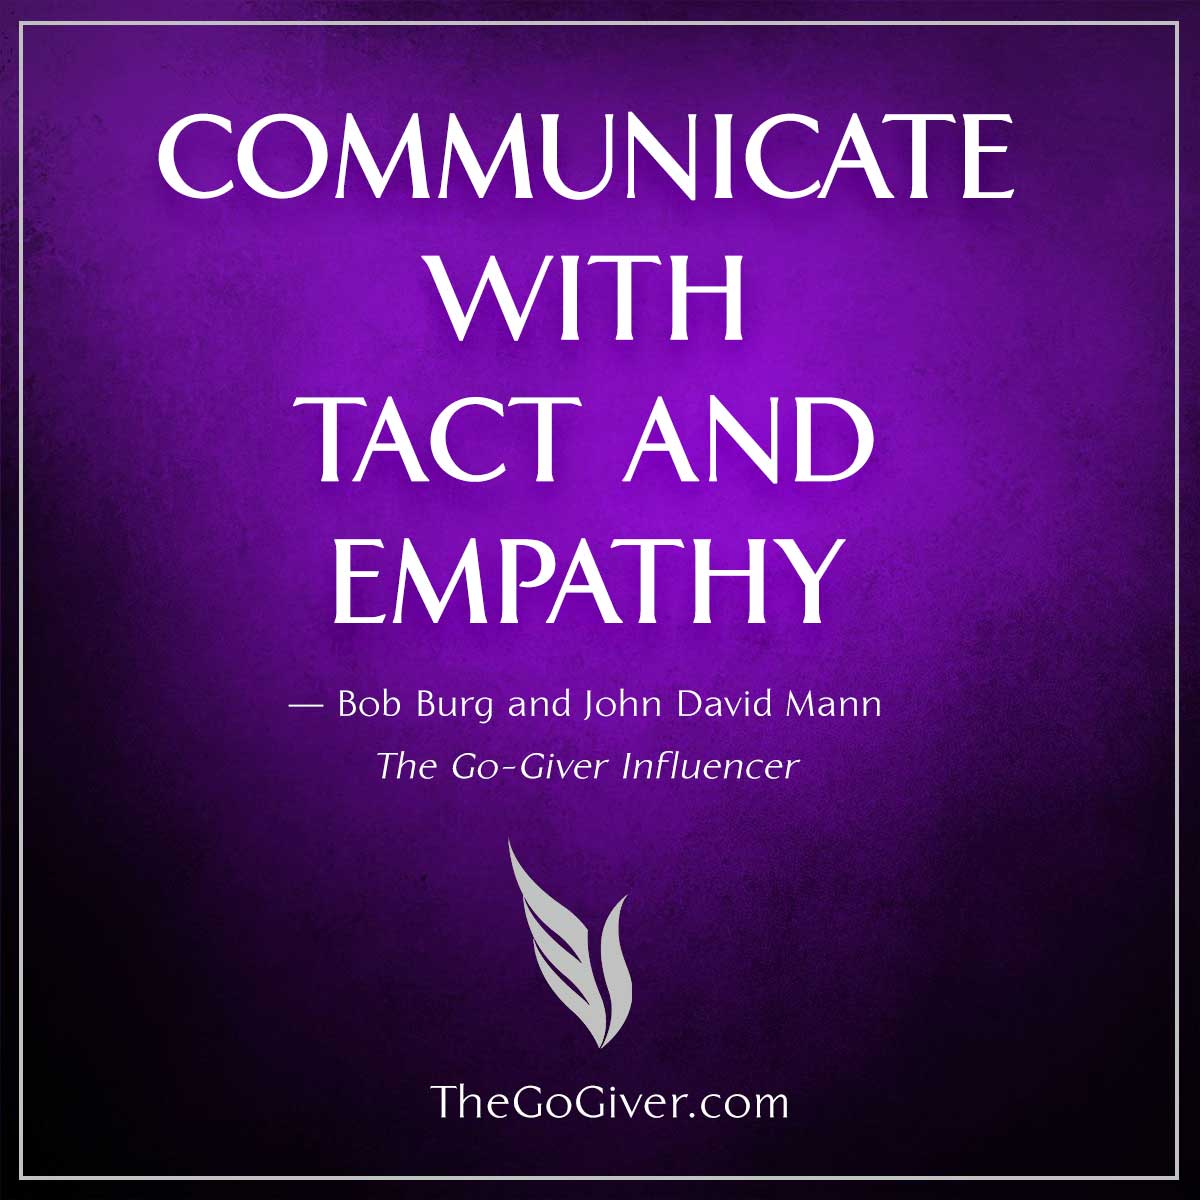 Communicate with Tact and Empathy - The Go-Giver Influencer